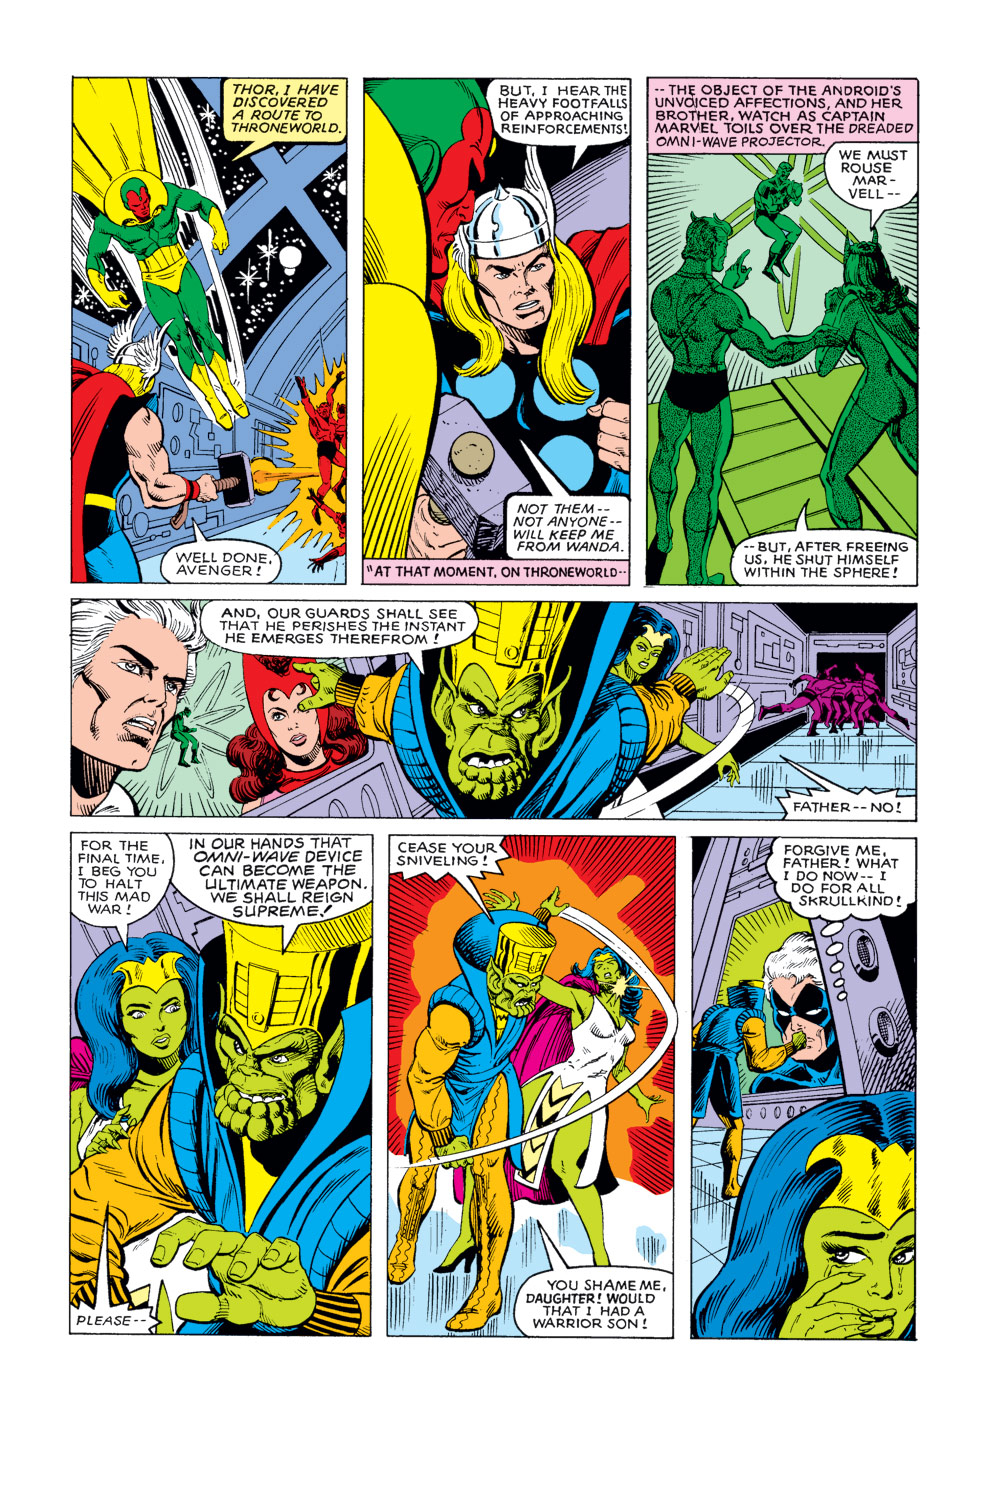 What If? (1977) issue 20 - The Avengers fought the Kree-Skrull war without Rick Jones - Page 12